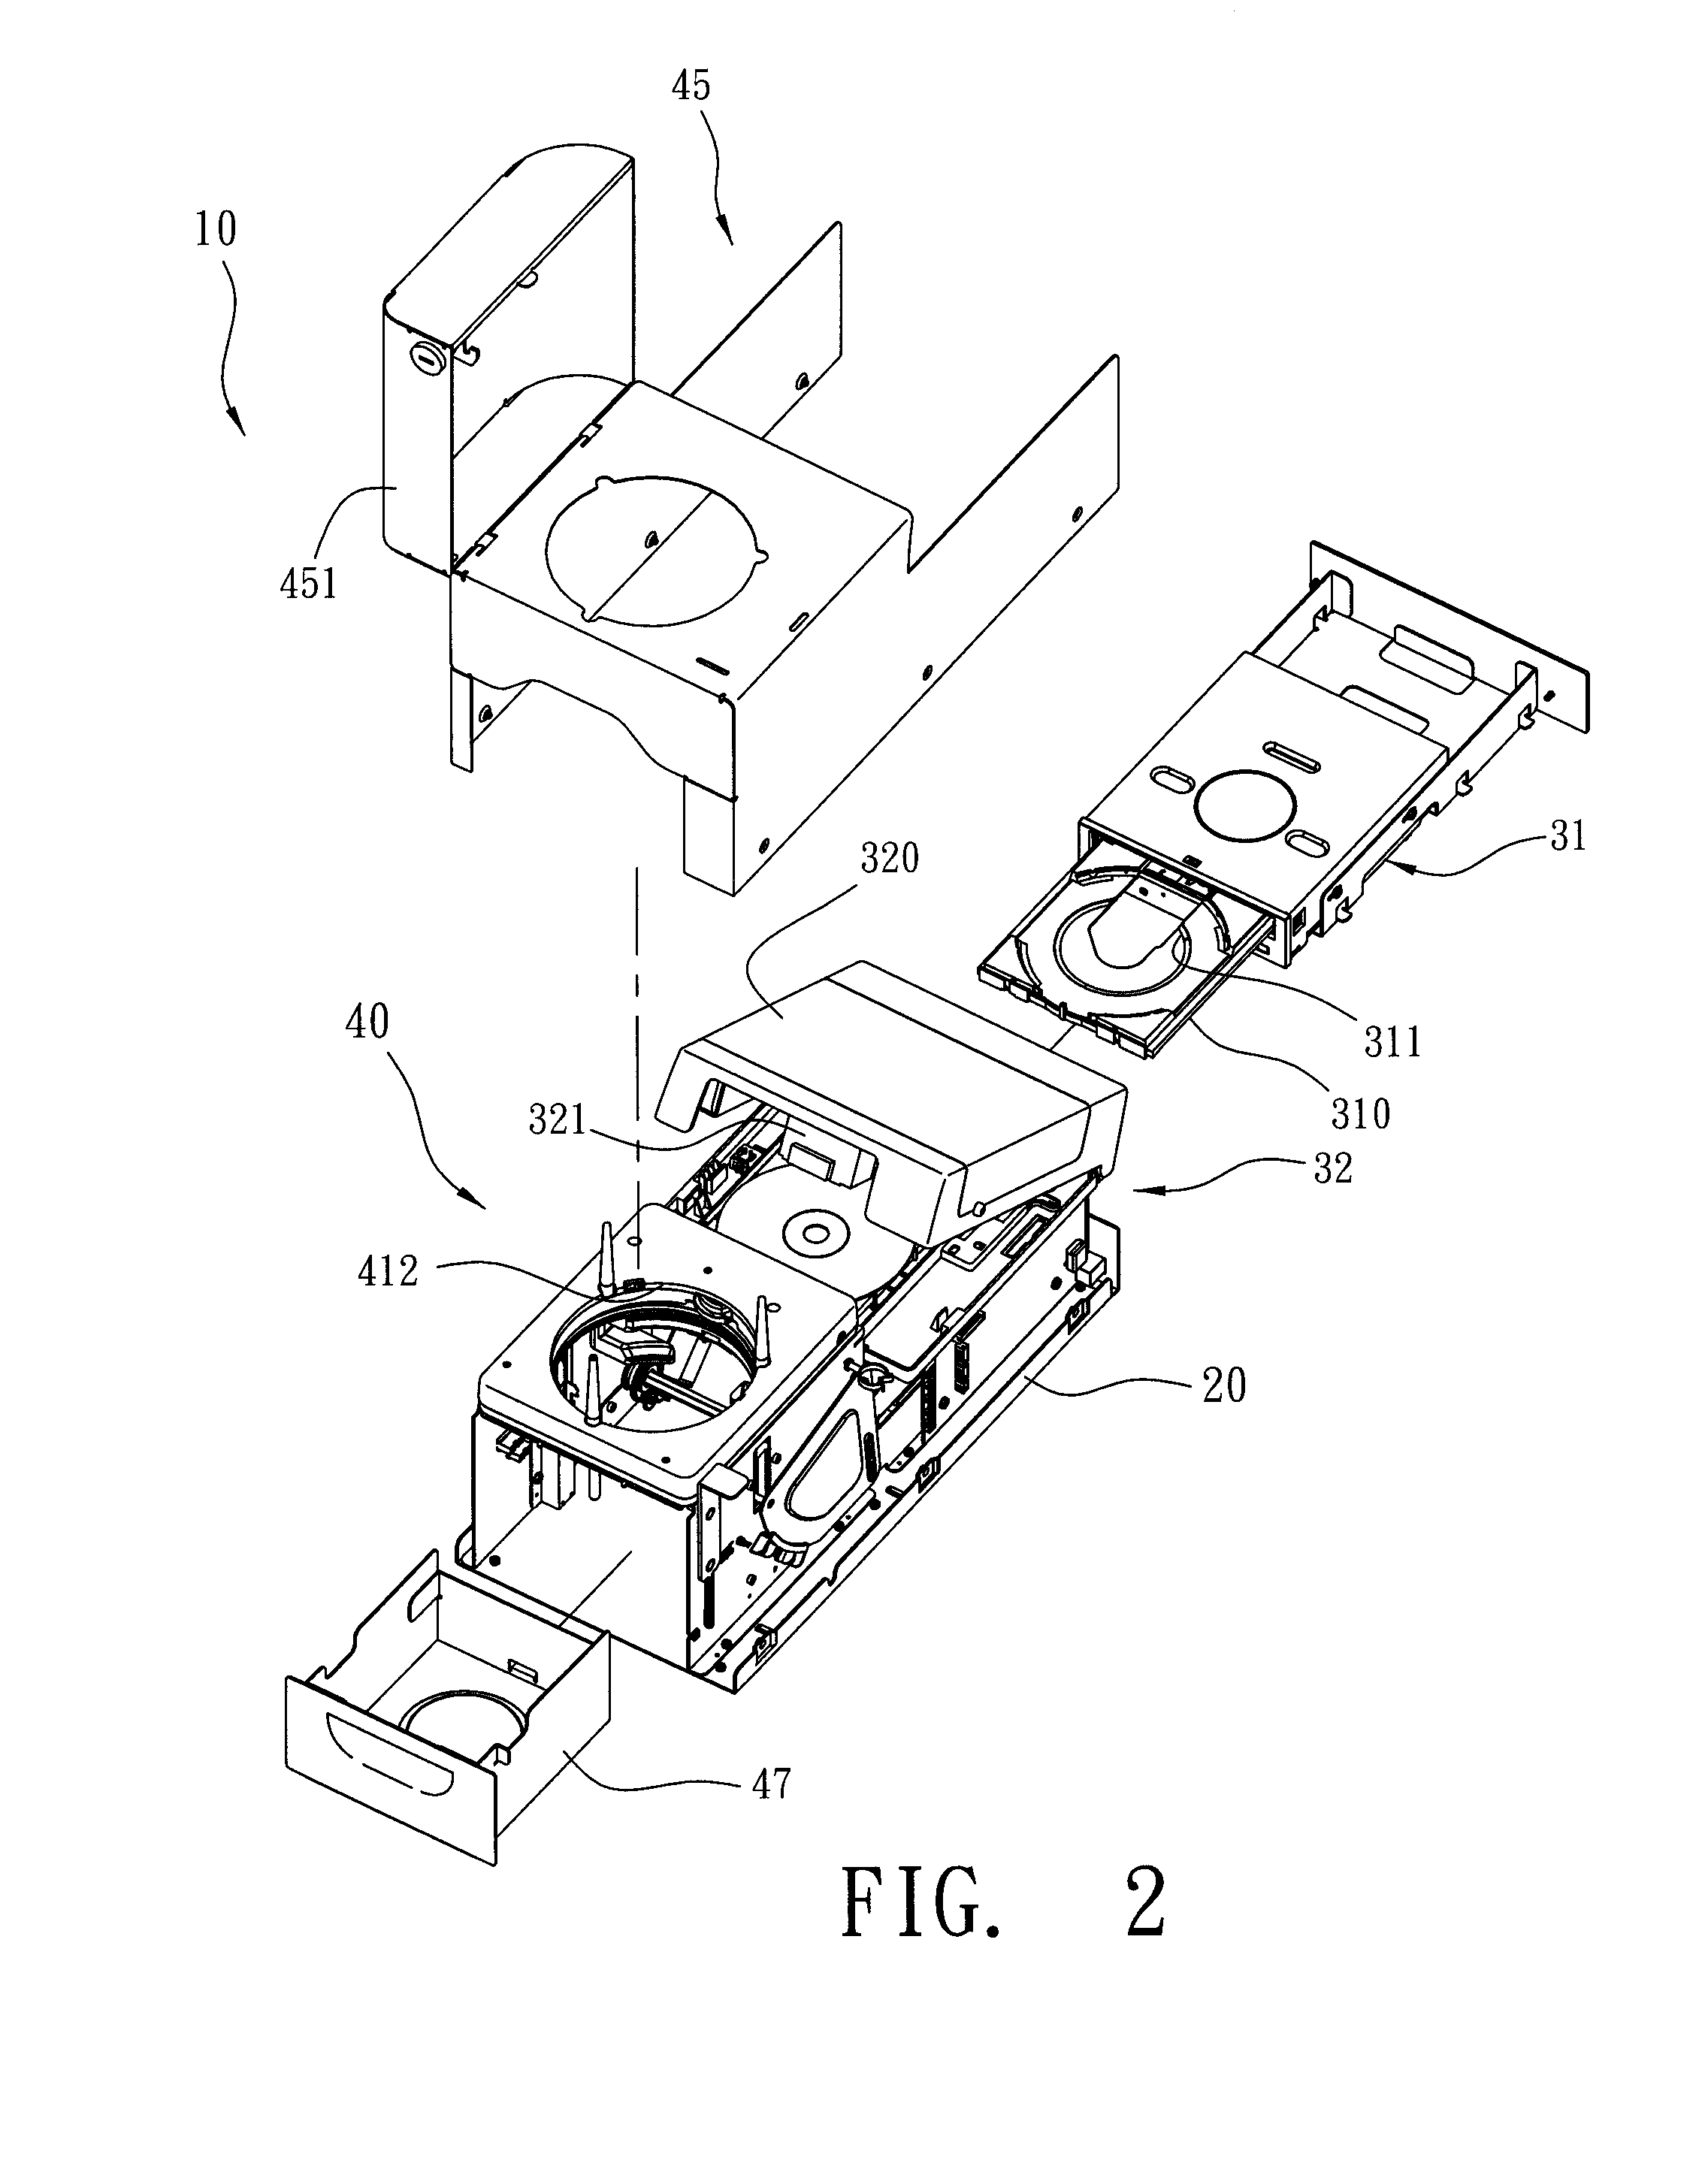 Auto feed, copy and print apparatus for information storage disks and method of the same